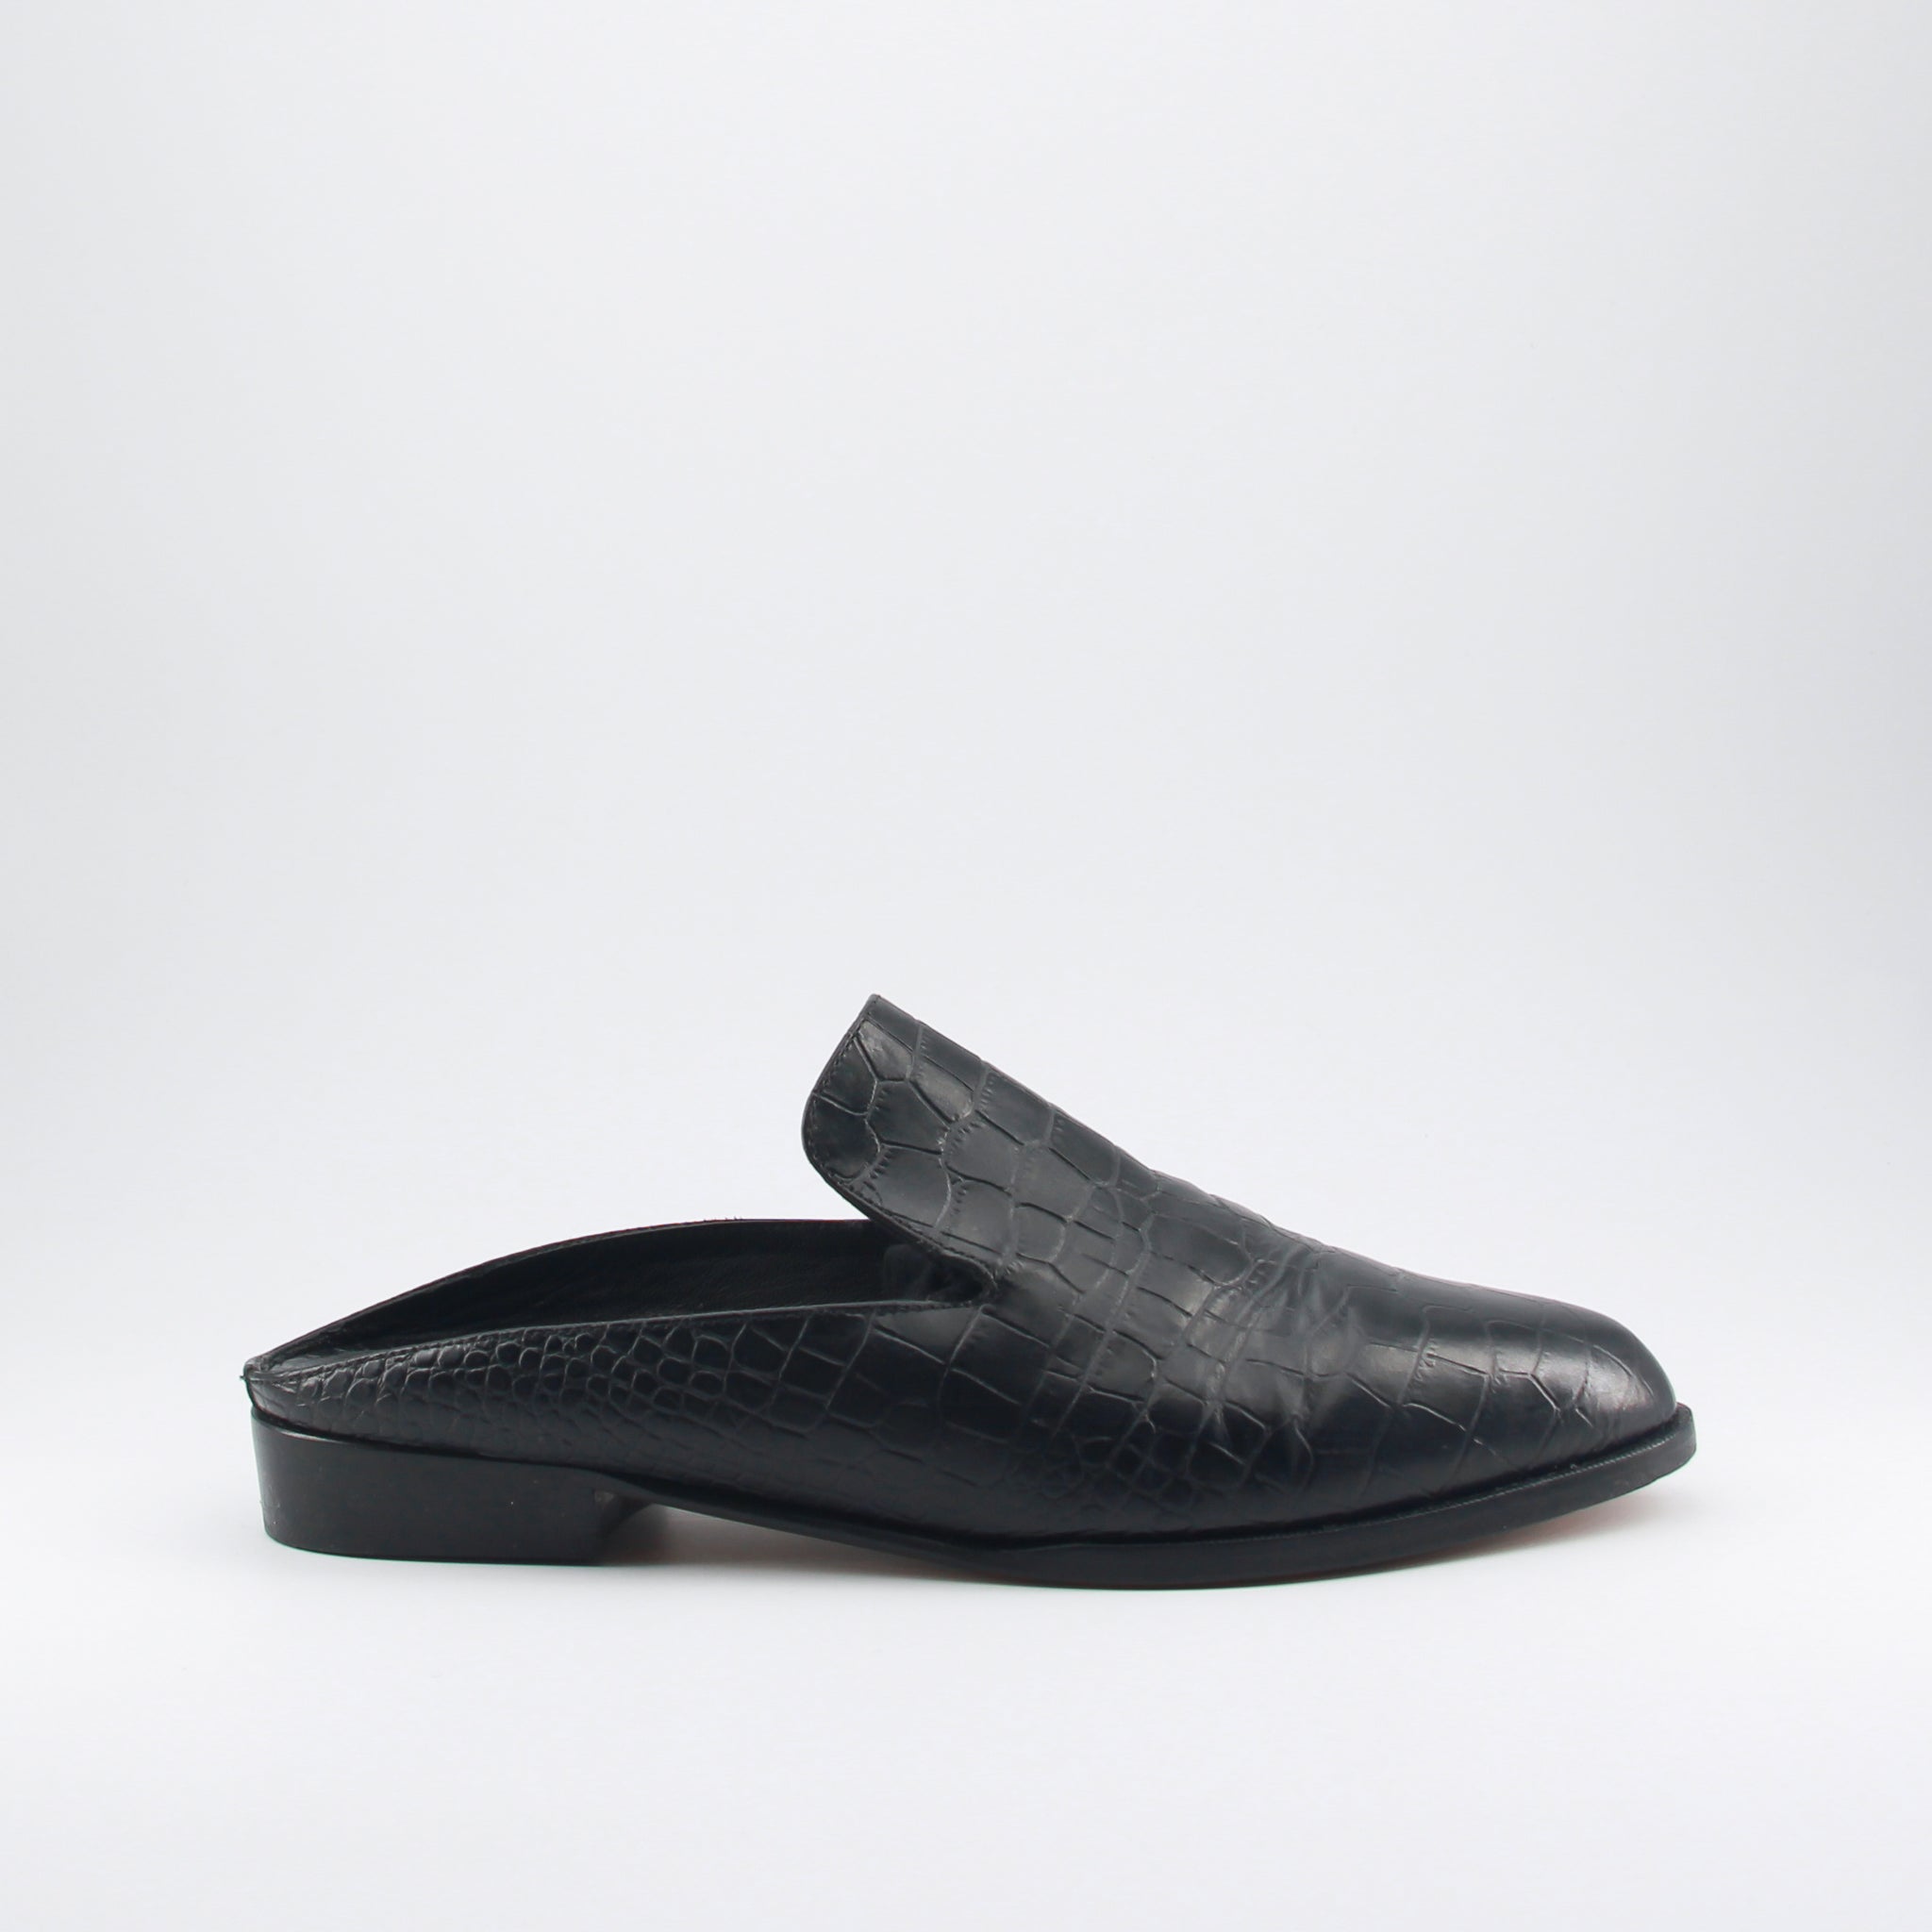 mules slippers CLERGERIE noir black cuir leather the tiger twist house of bichonnage chaussure de luxe luxury shoes seconde main second hand rénovée renovated cordonnerie repair annecy